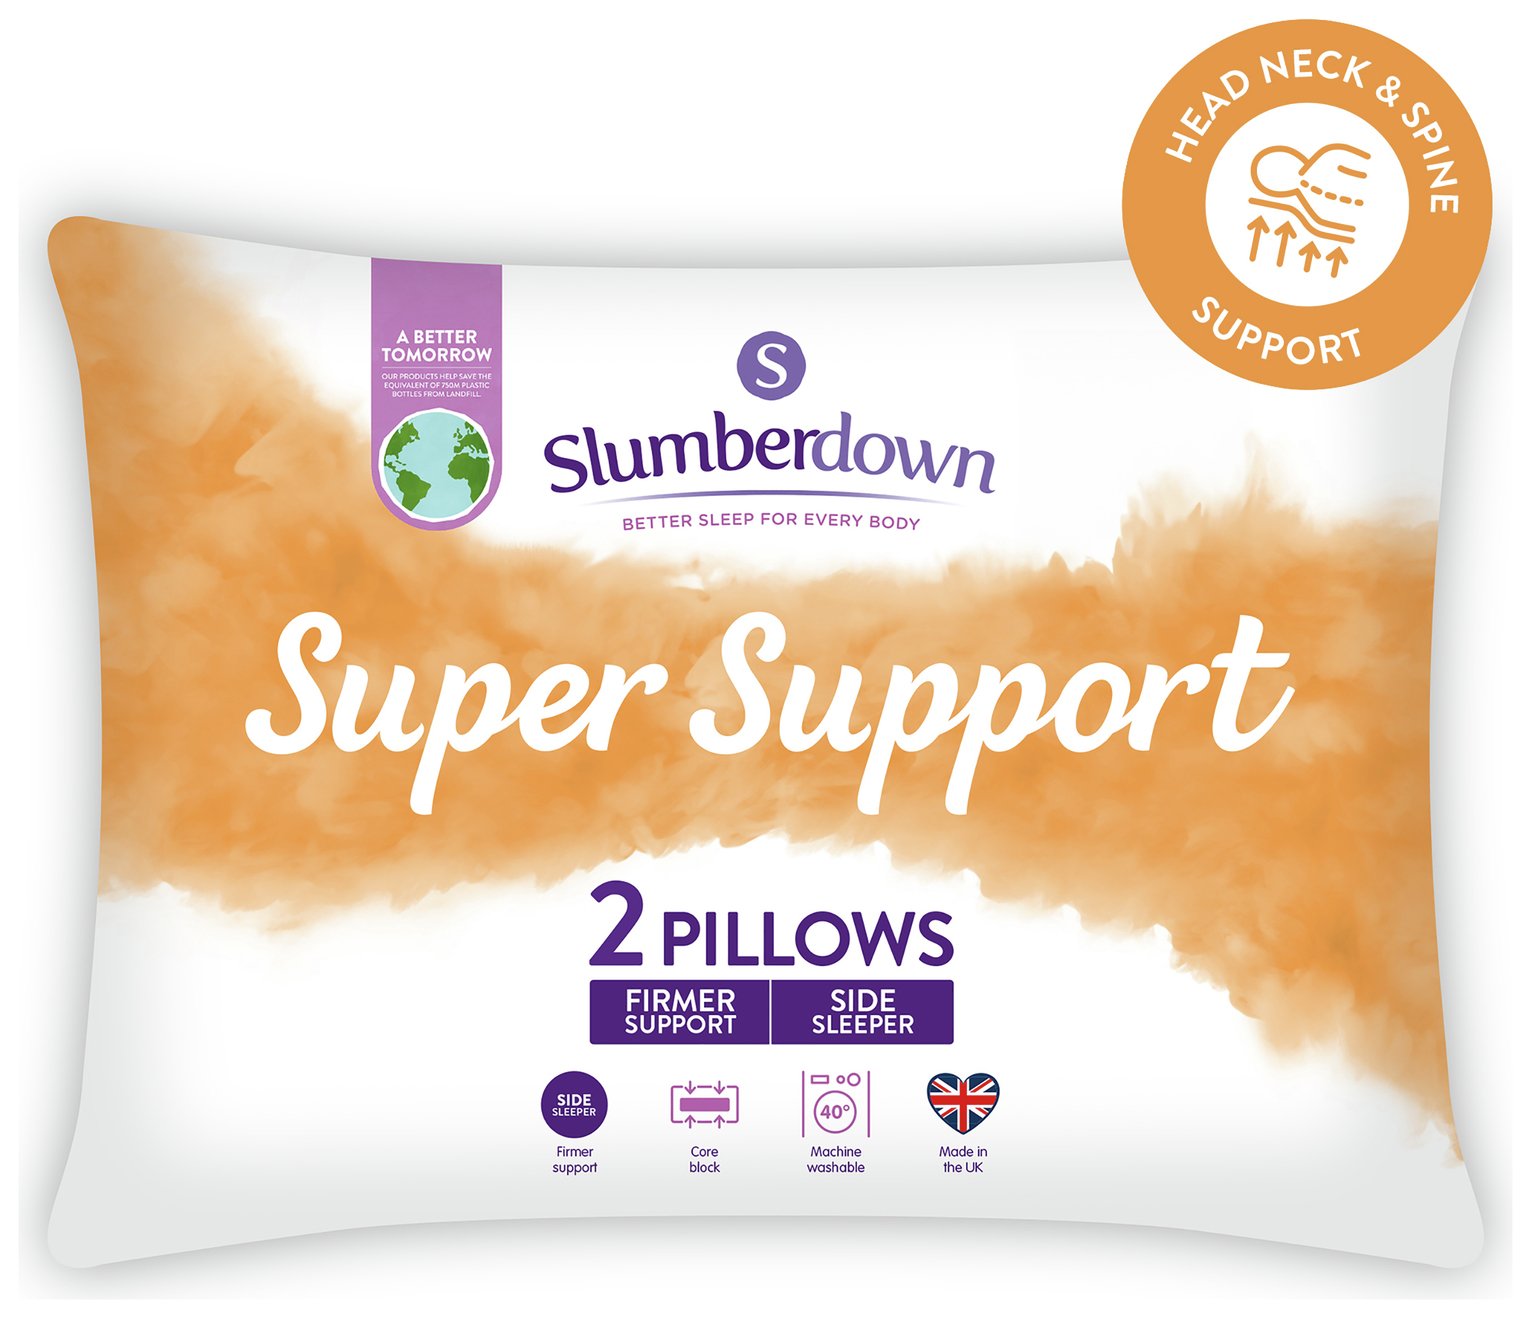 Slumberdown Support Pair of Pillows review